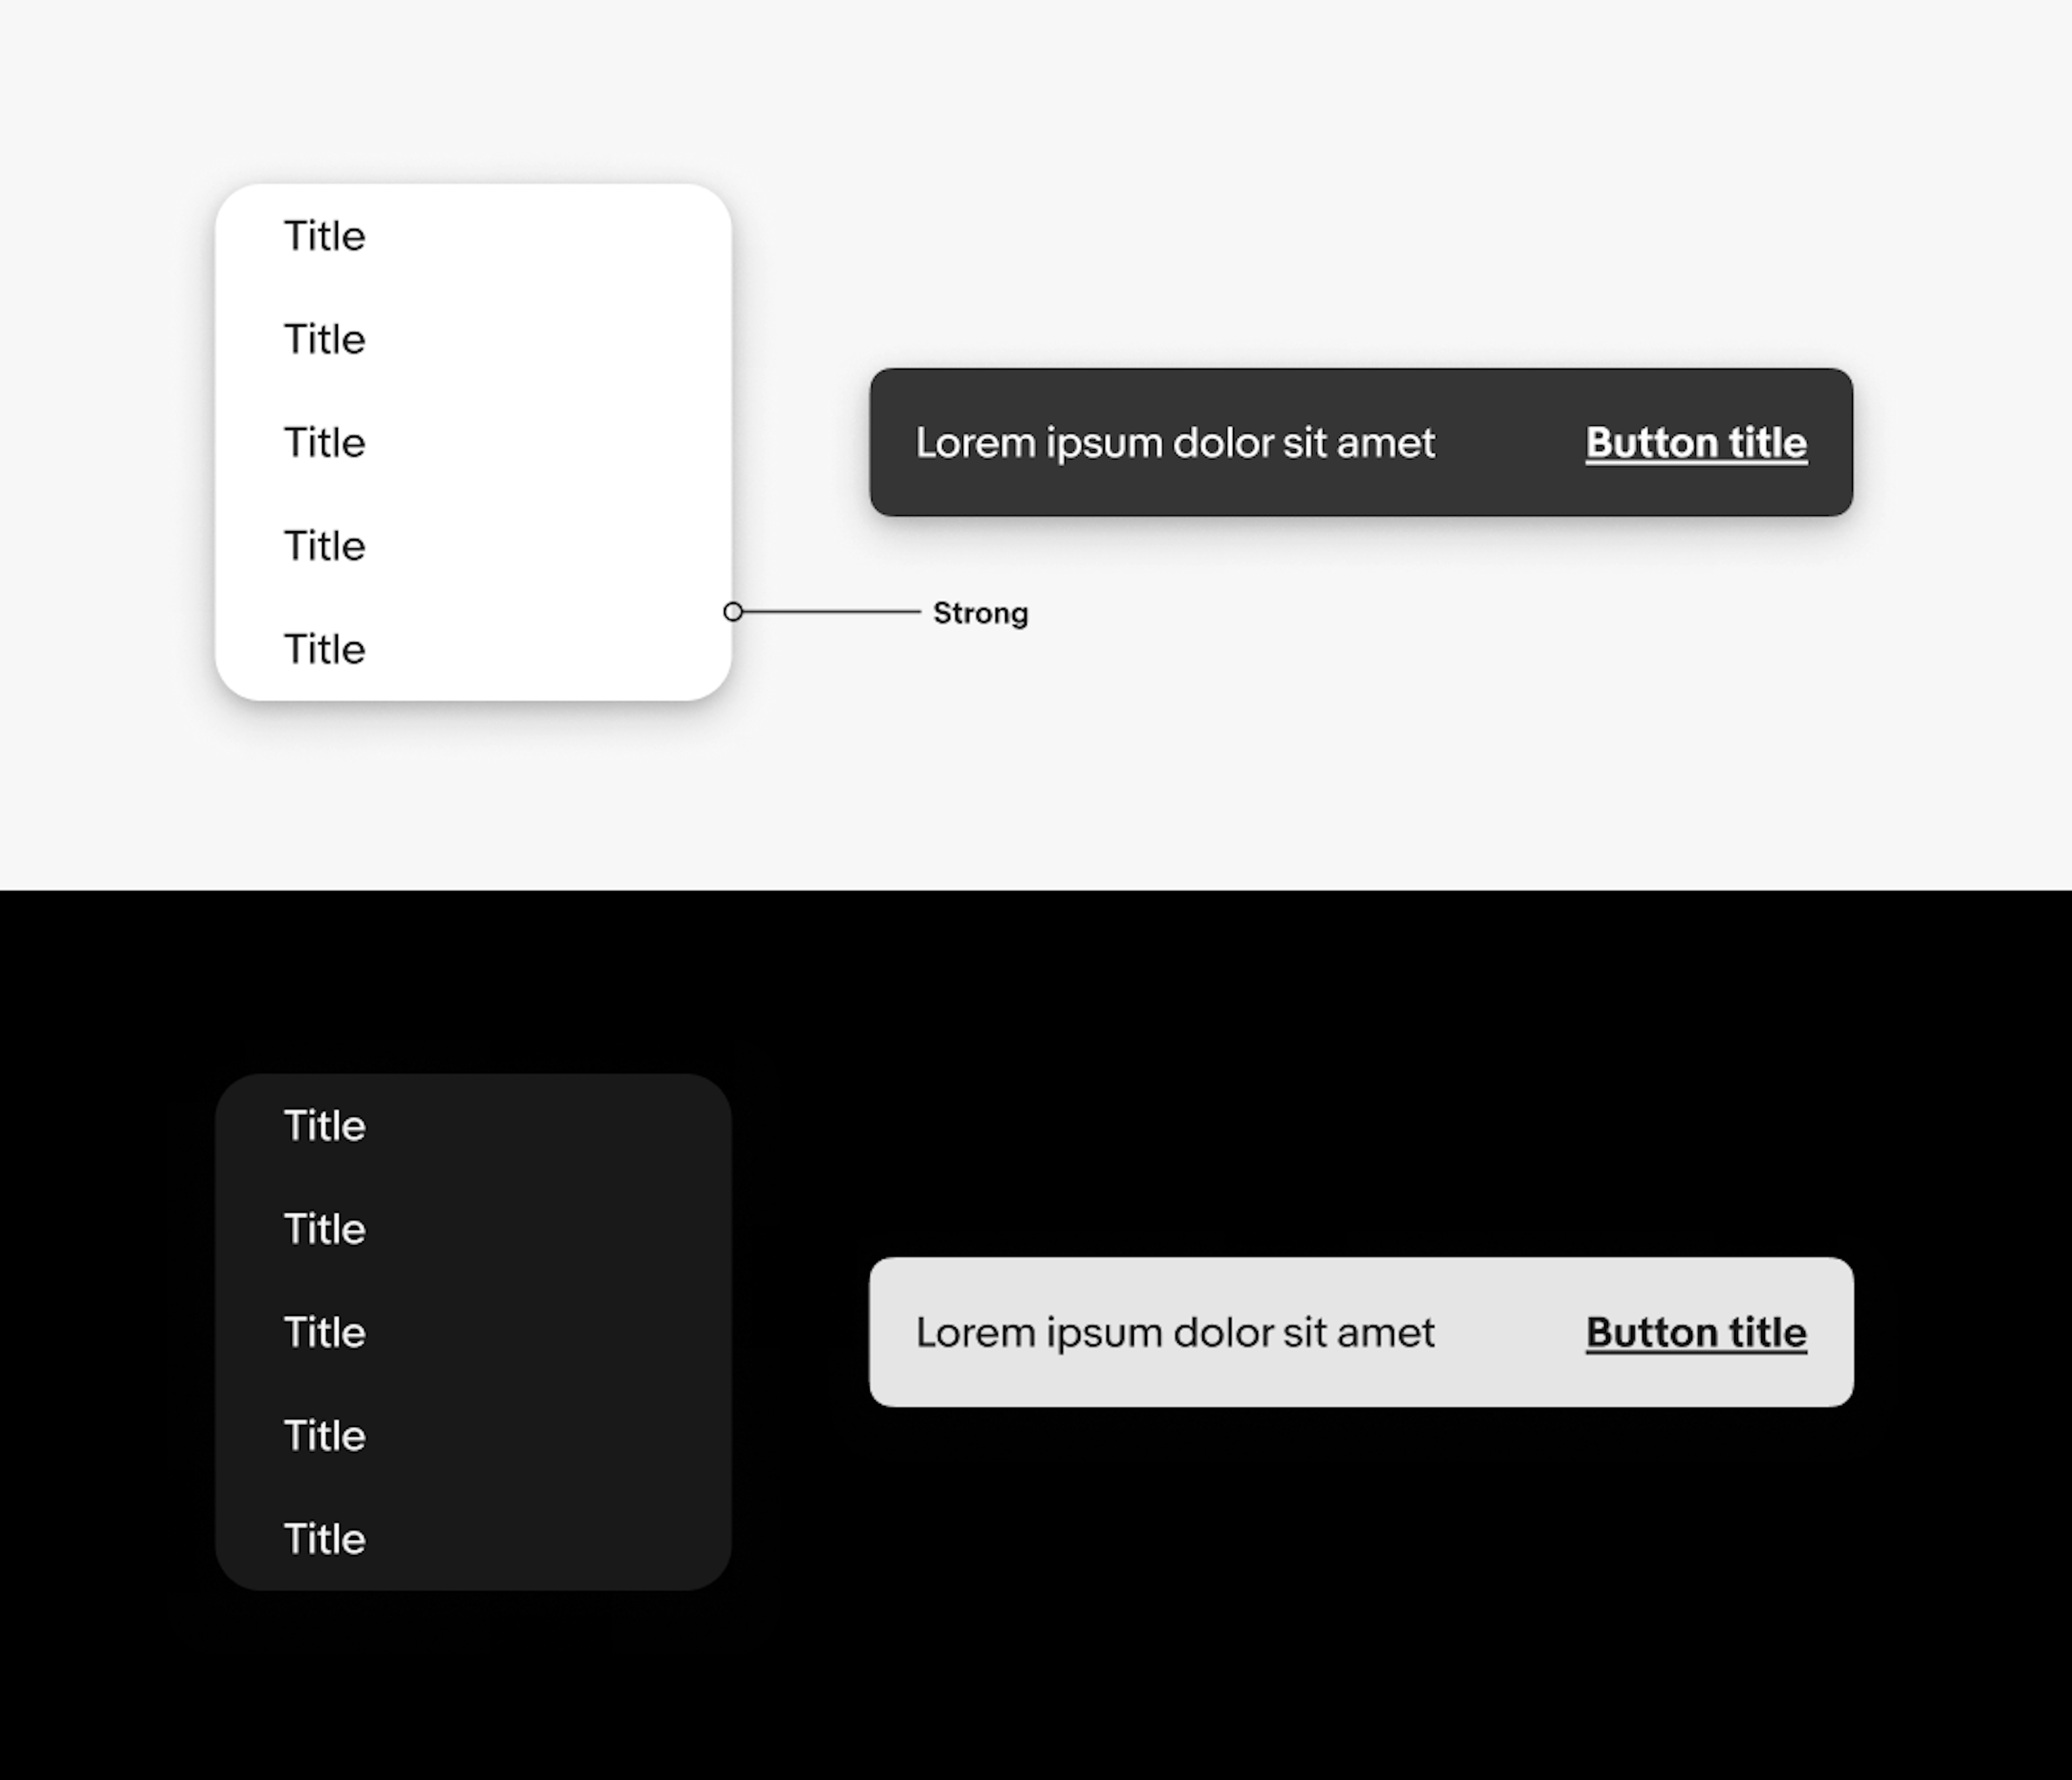 Tow rows with components inside. The top is in light mode with a popover menu and a snackbar with the strong shadow applied. The bottom row is in dark mode with the same components and shadow applied and the shadow disappears.